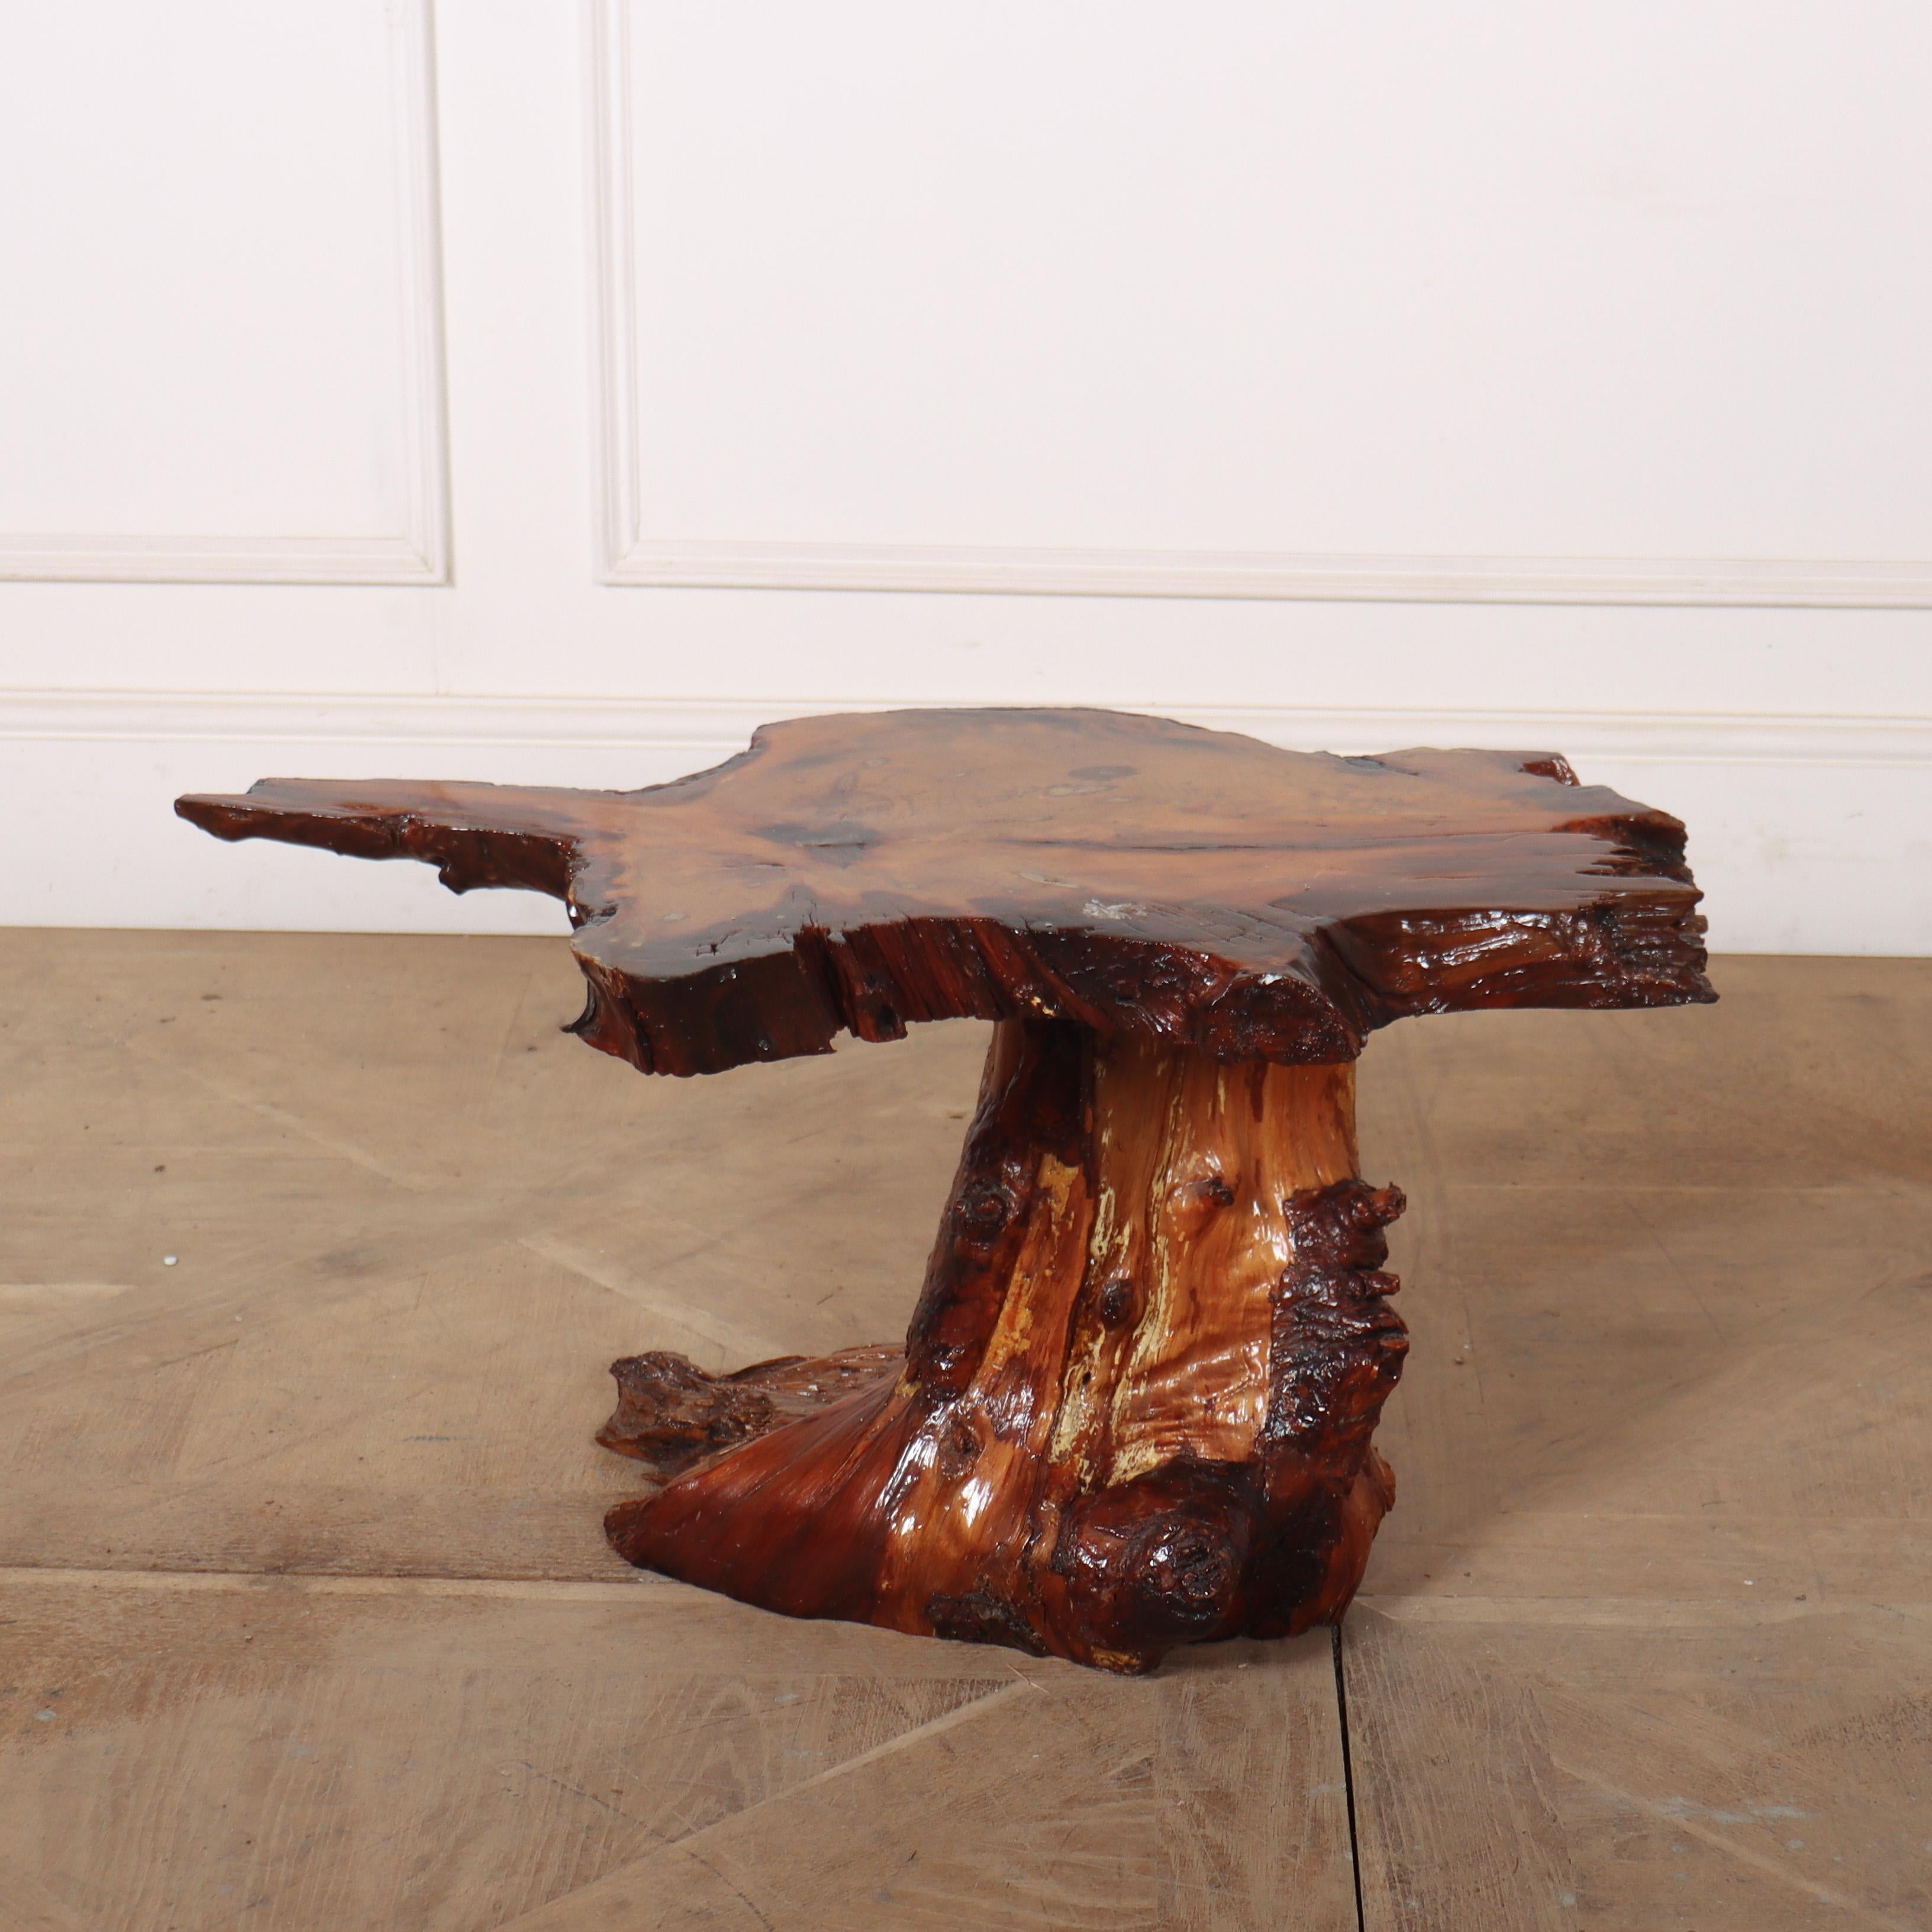 Funky little English root side table. 1920.

Reference: 8329

Dimensions
28 inches (71 cms) Wide
18 inches (46 cms) Deep
26 inches (66 cms) High